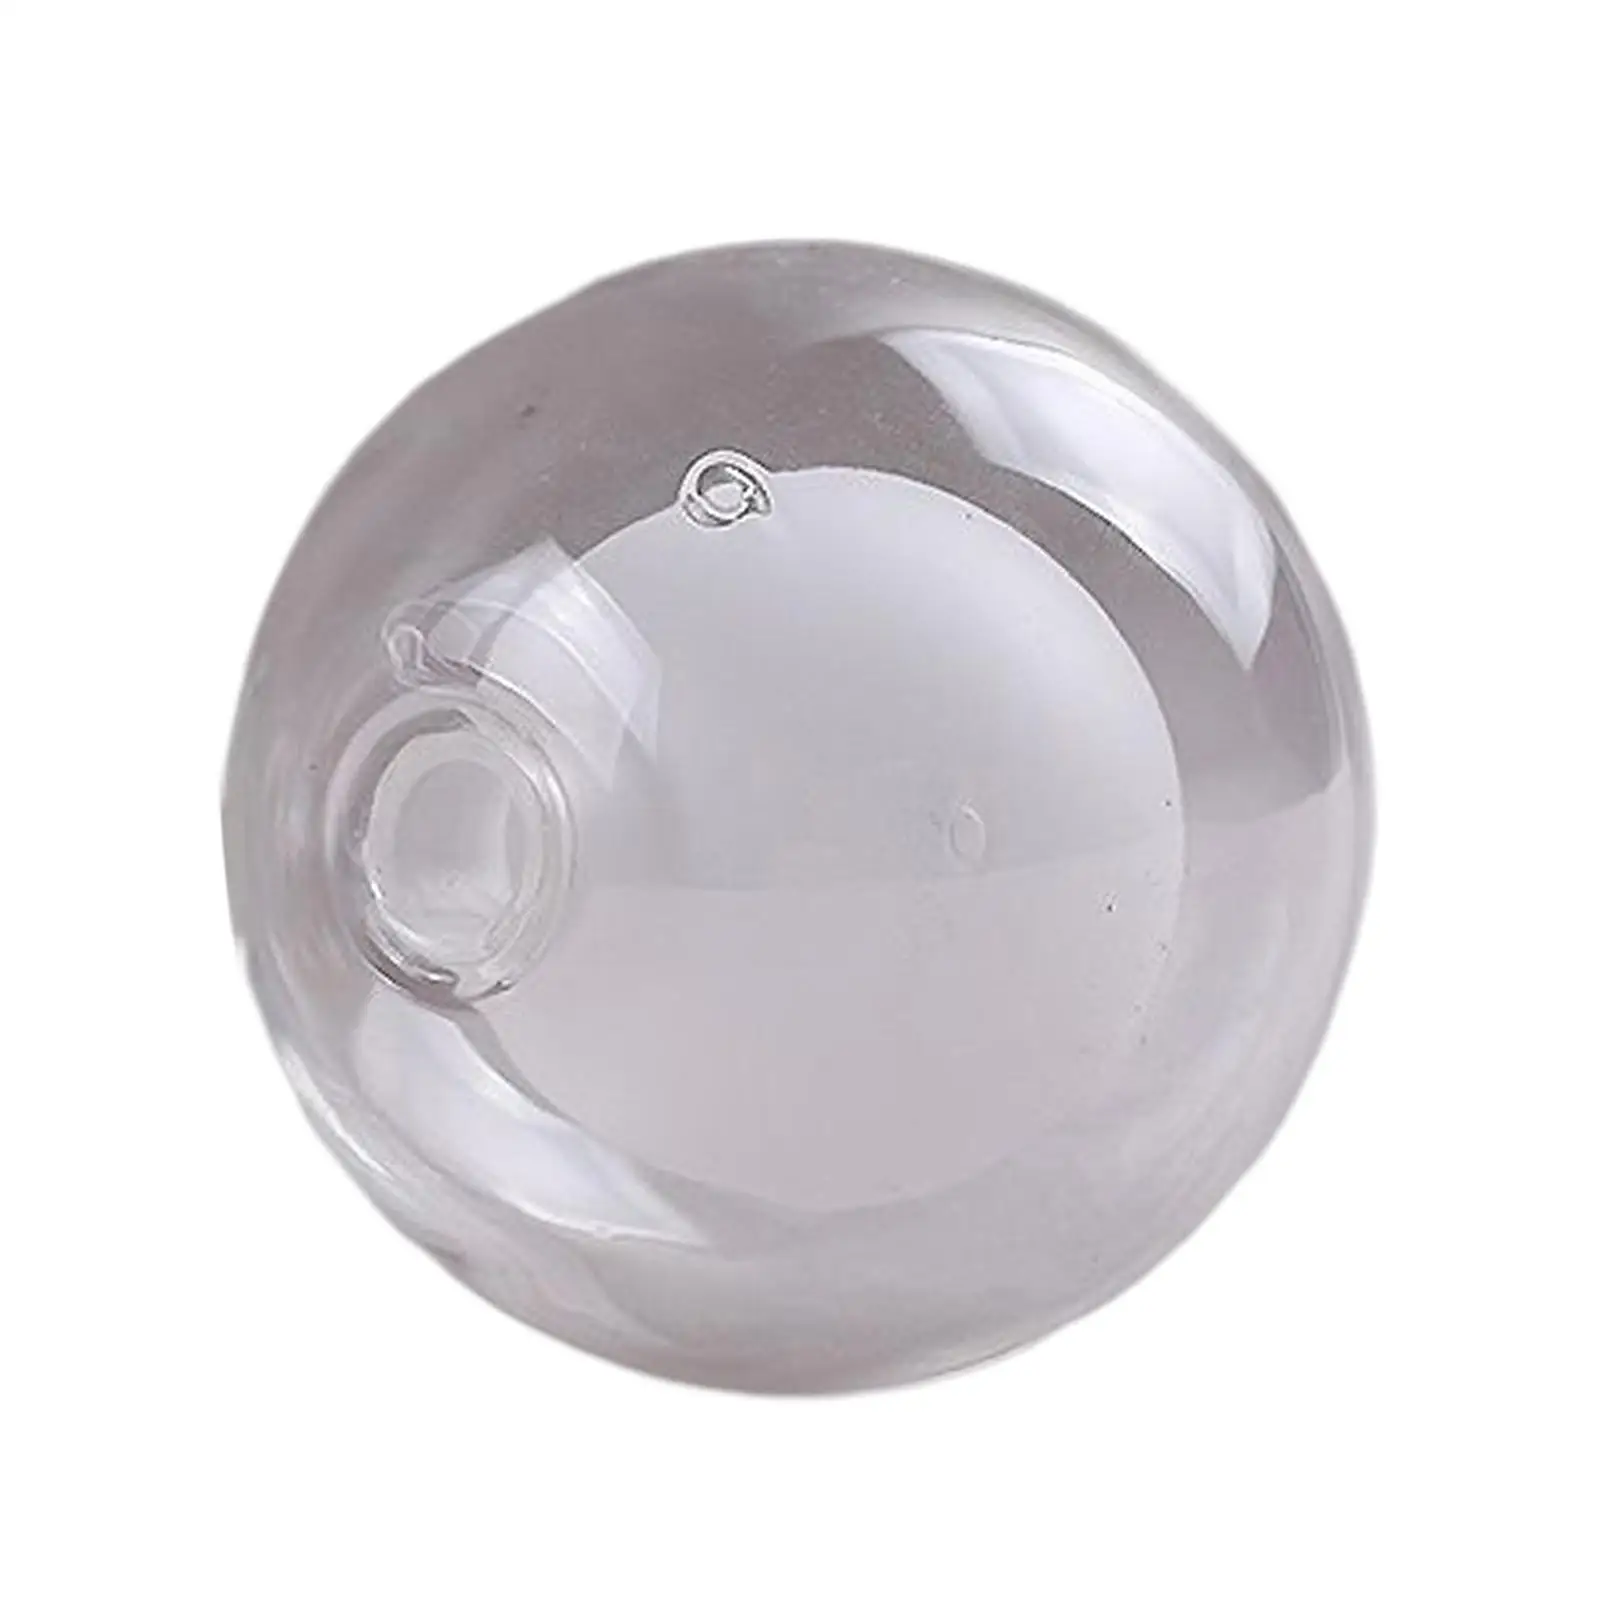 Round Lampshade Cover Ceiling Light Fixture Dorm Room Glass Globe Lamp Shade